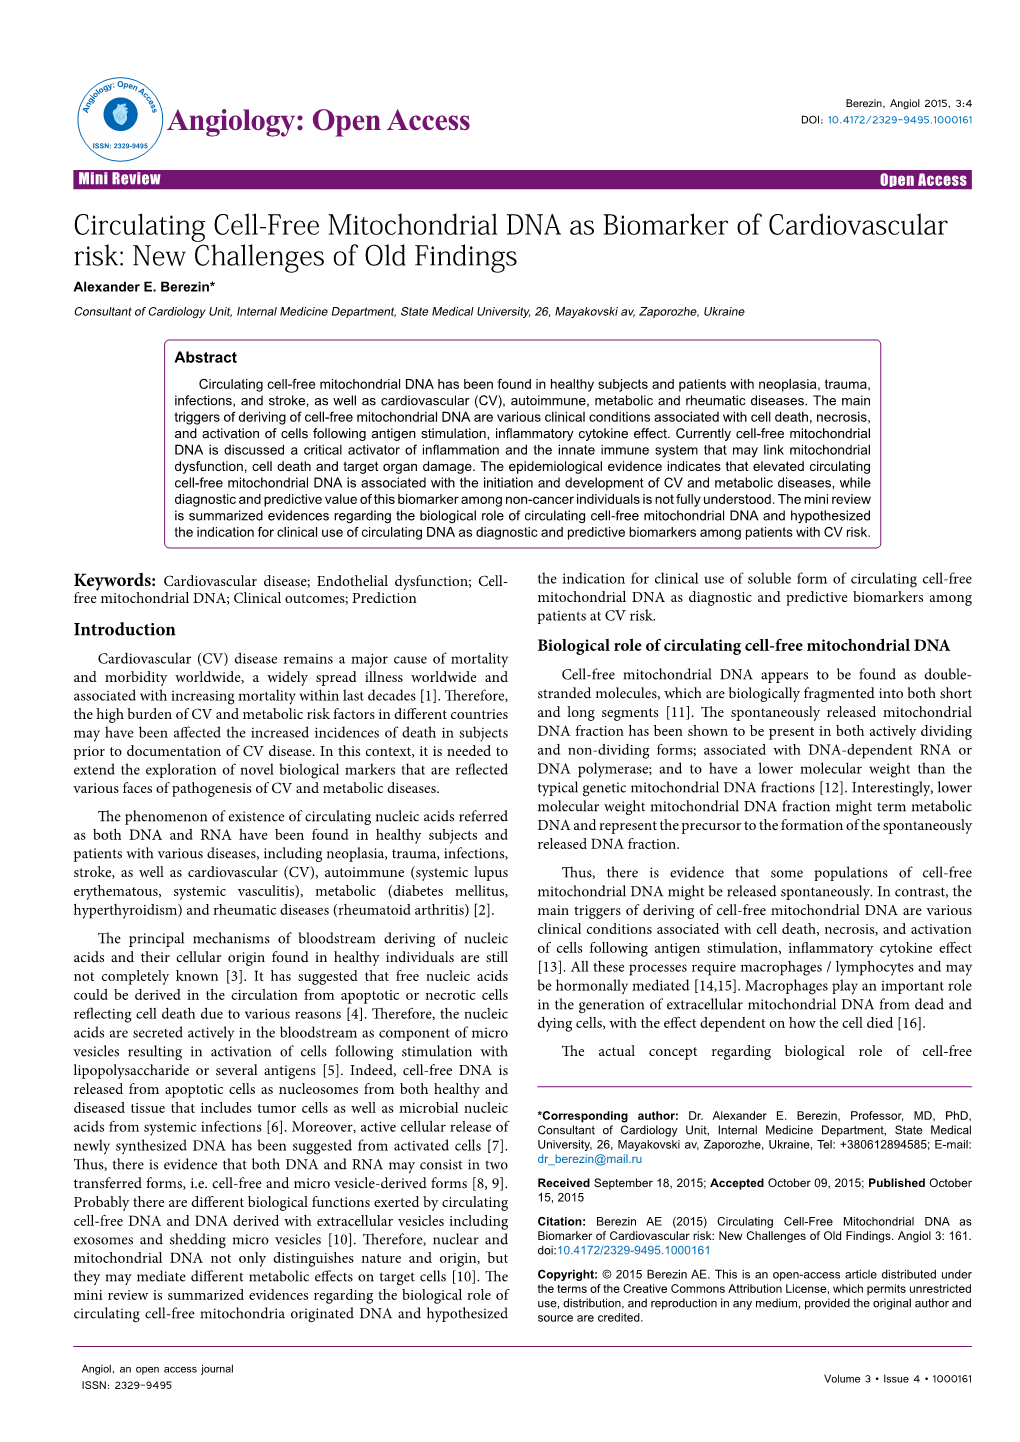 Circulating Cell-Free Mitochondrial DNA As Biomarker of Cardiovascular Risk: New Challenges of Old Findings Alexander E